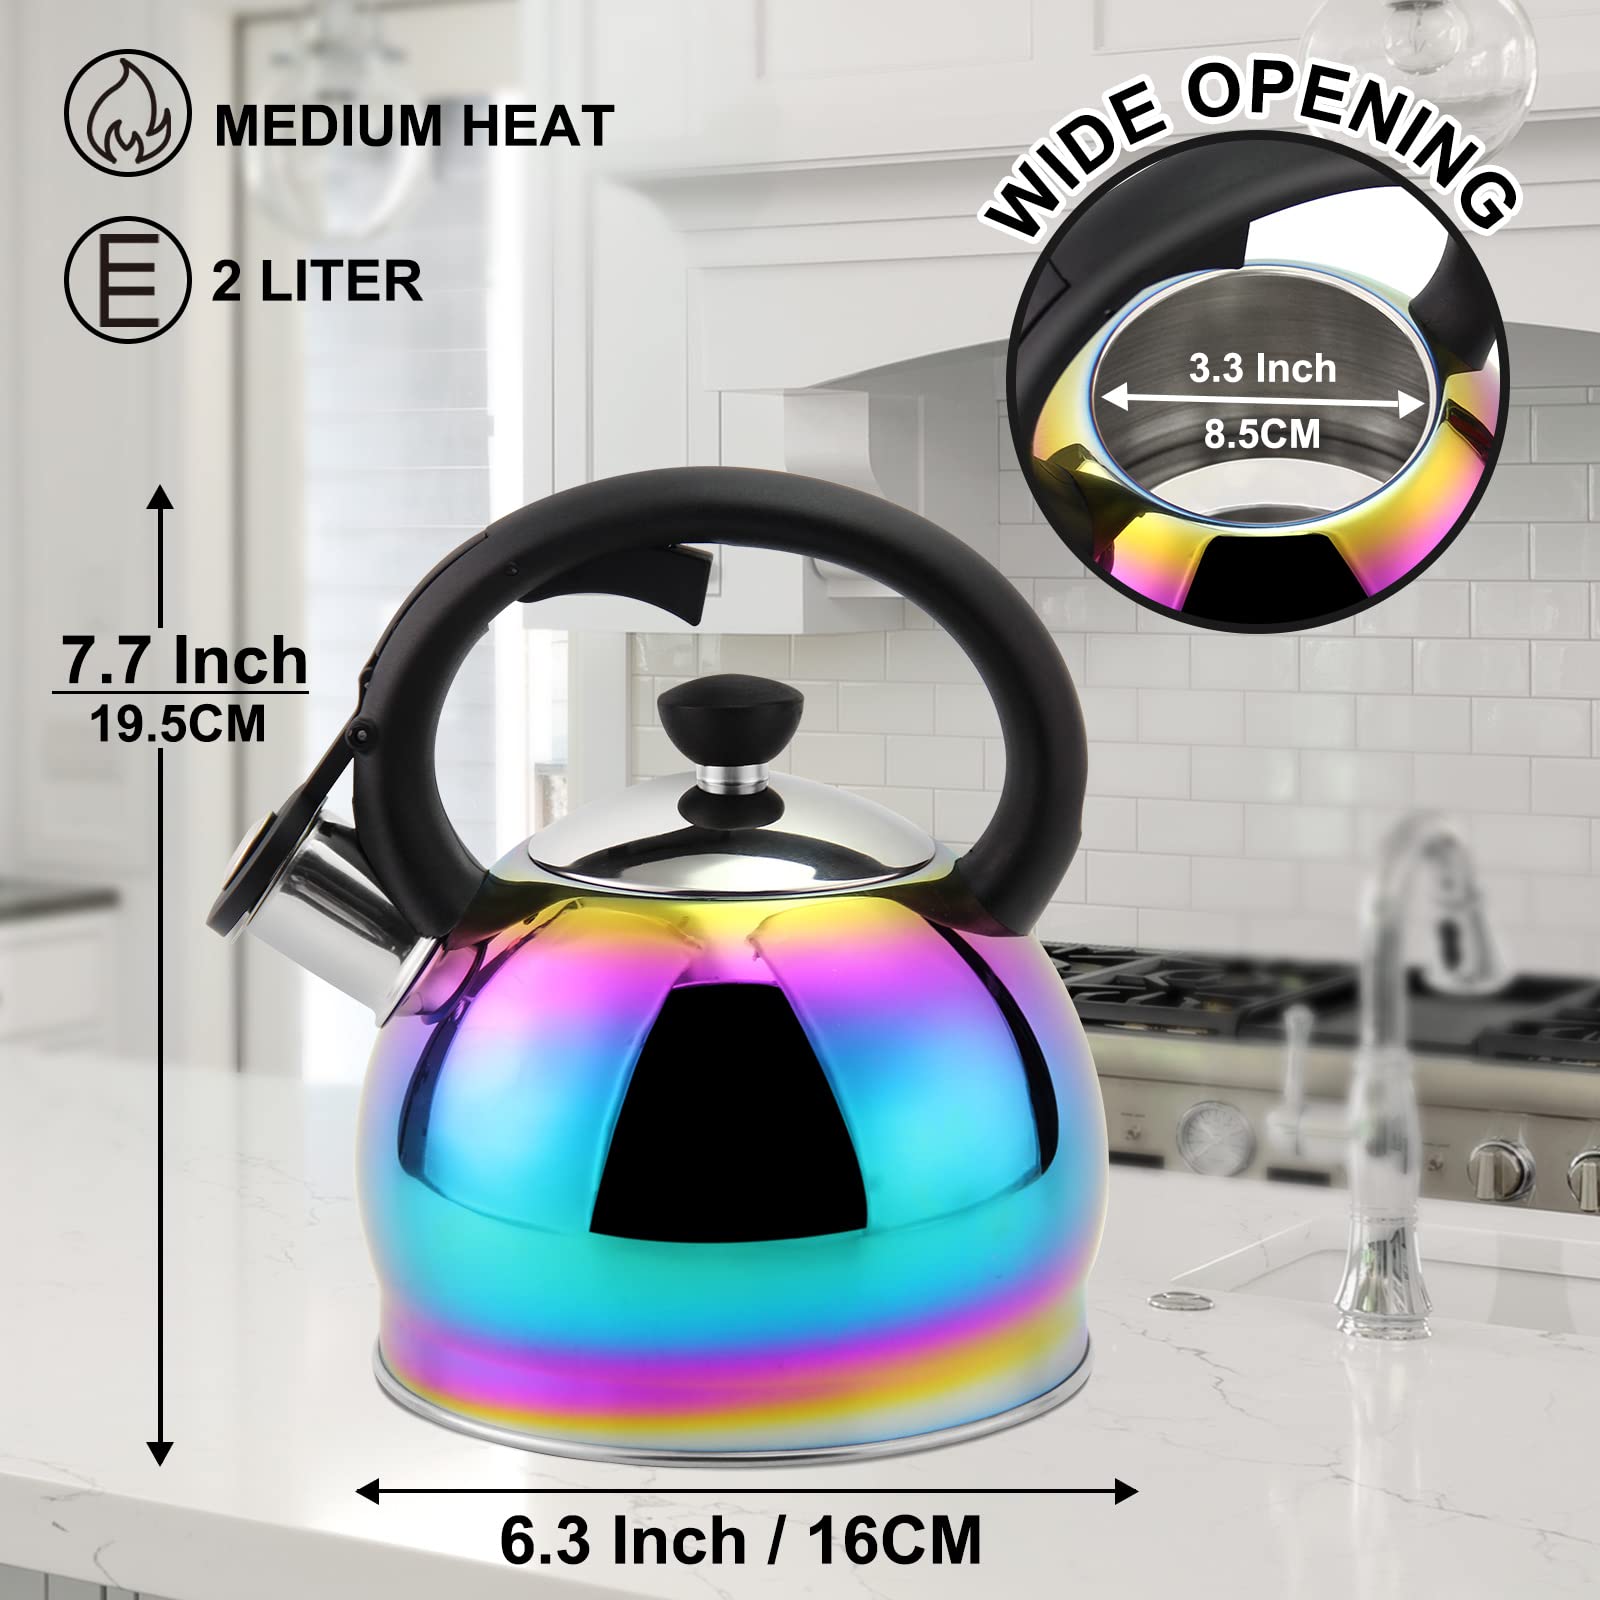 SHANGZHER Stainless Steel Coffee Tea Kettles Whistling Kettle for Gas Hob Induction Gas Kettle with Whistle Stovetop Kettles 2.1 Qt / 2 Liter Rainbow Color